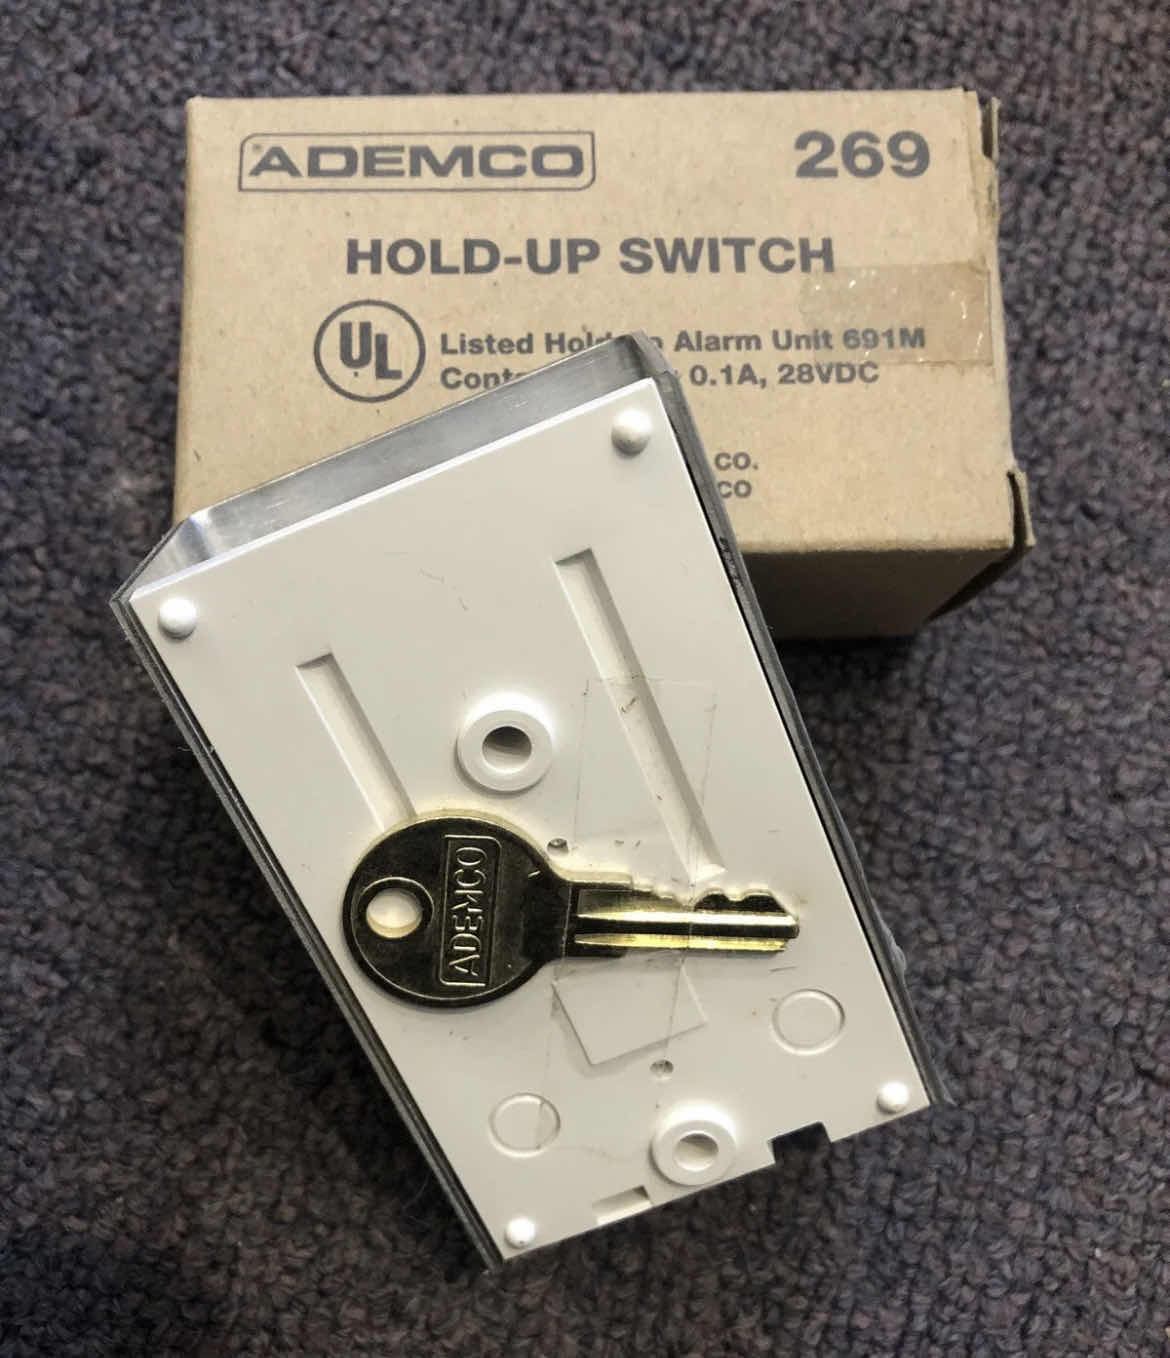 Photo 2 of ADEMCO 269 HOLD-UP SWITCH WITH KEYED RESET